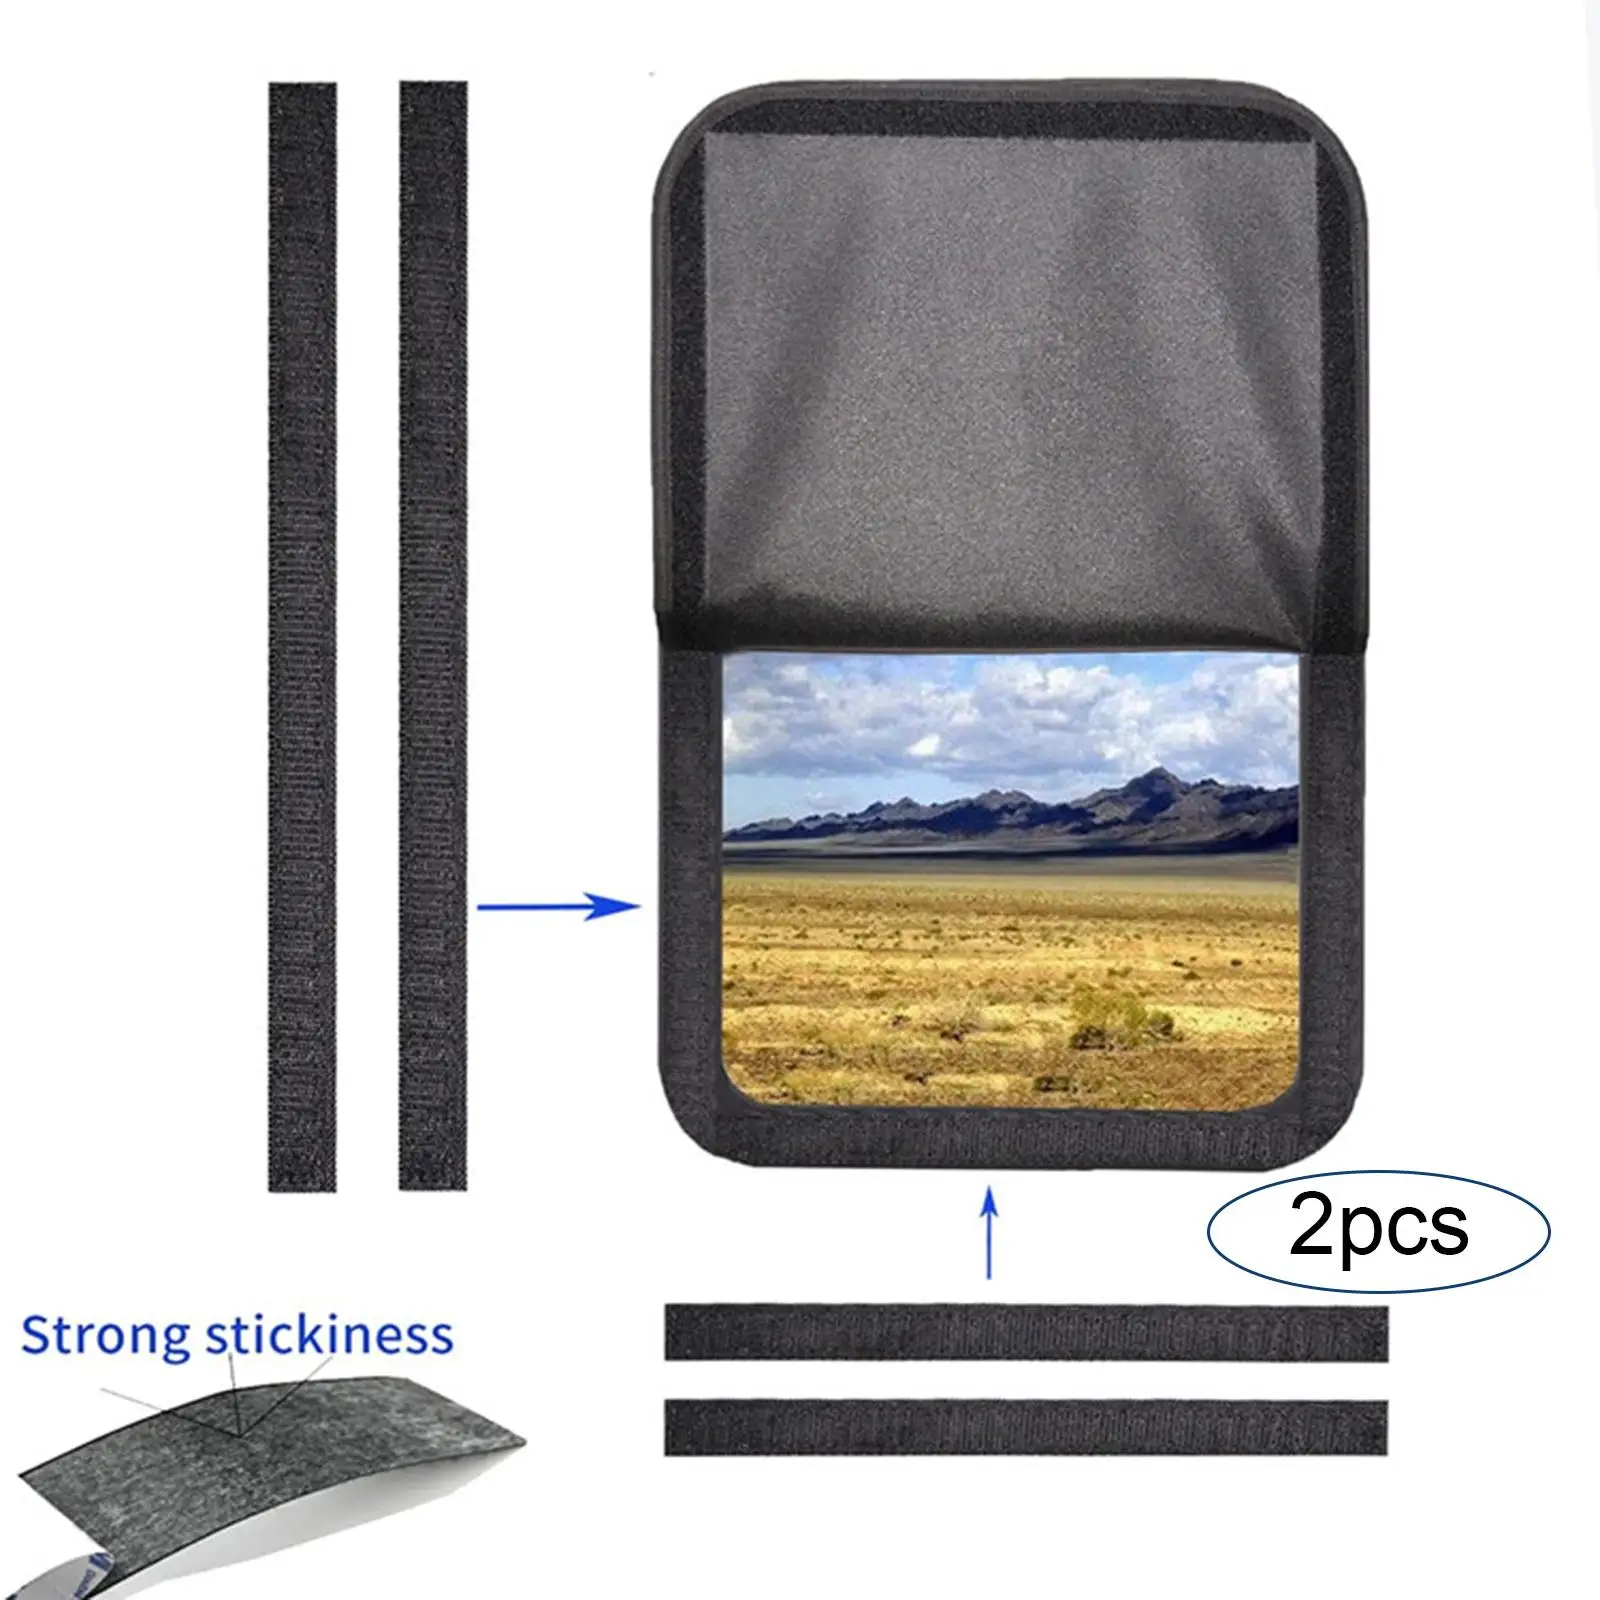 RV Door Window Fabric Protective Protective Travel Trailer Windshield Collapsible Black Sunshade for Trailers Campers